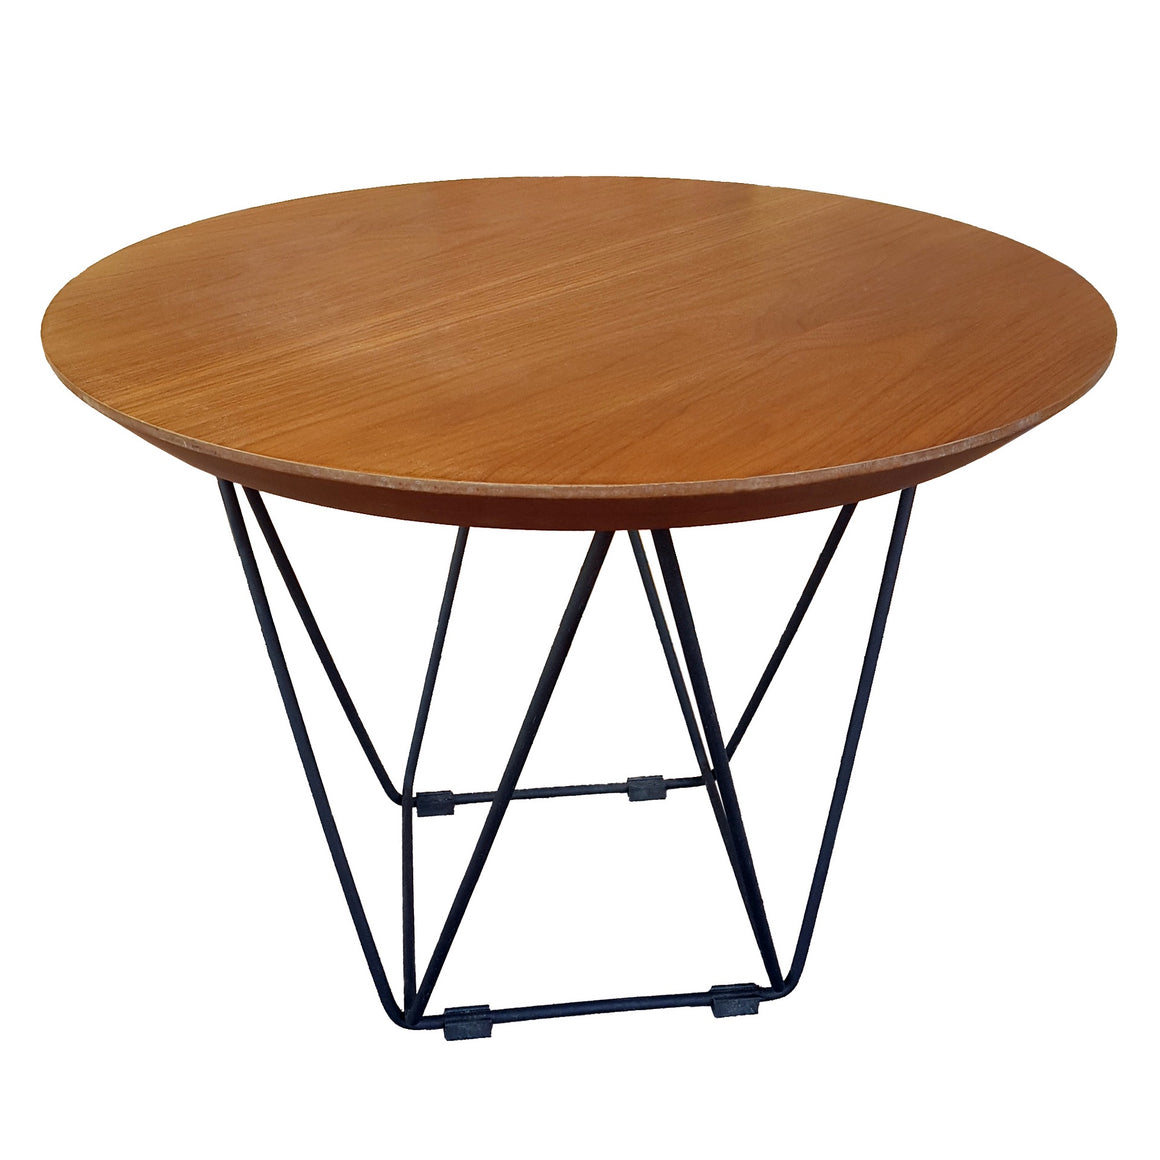 Round timber side table